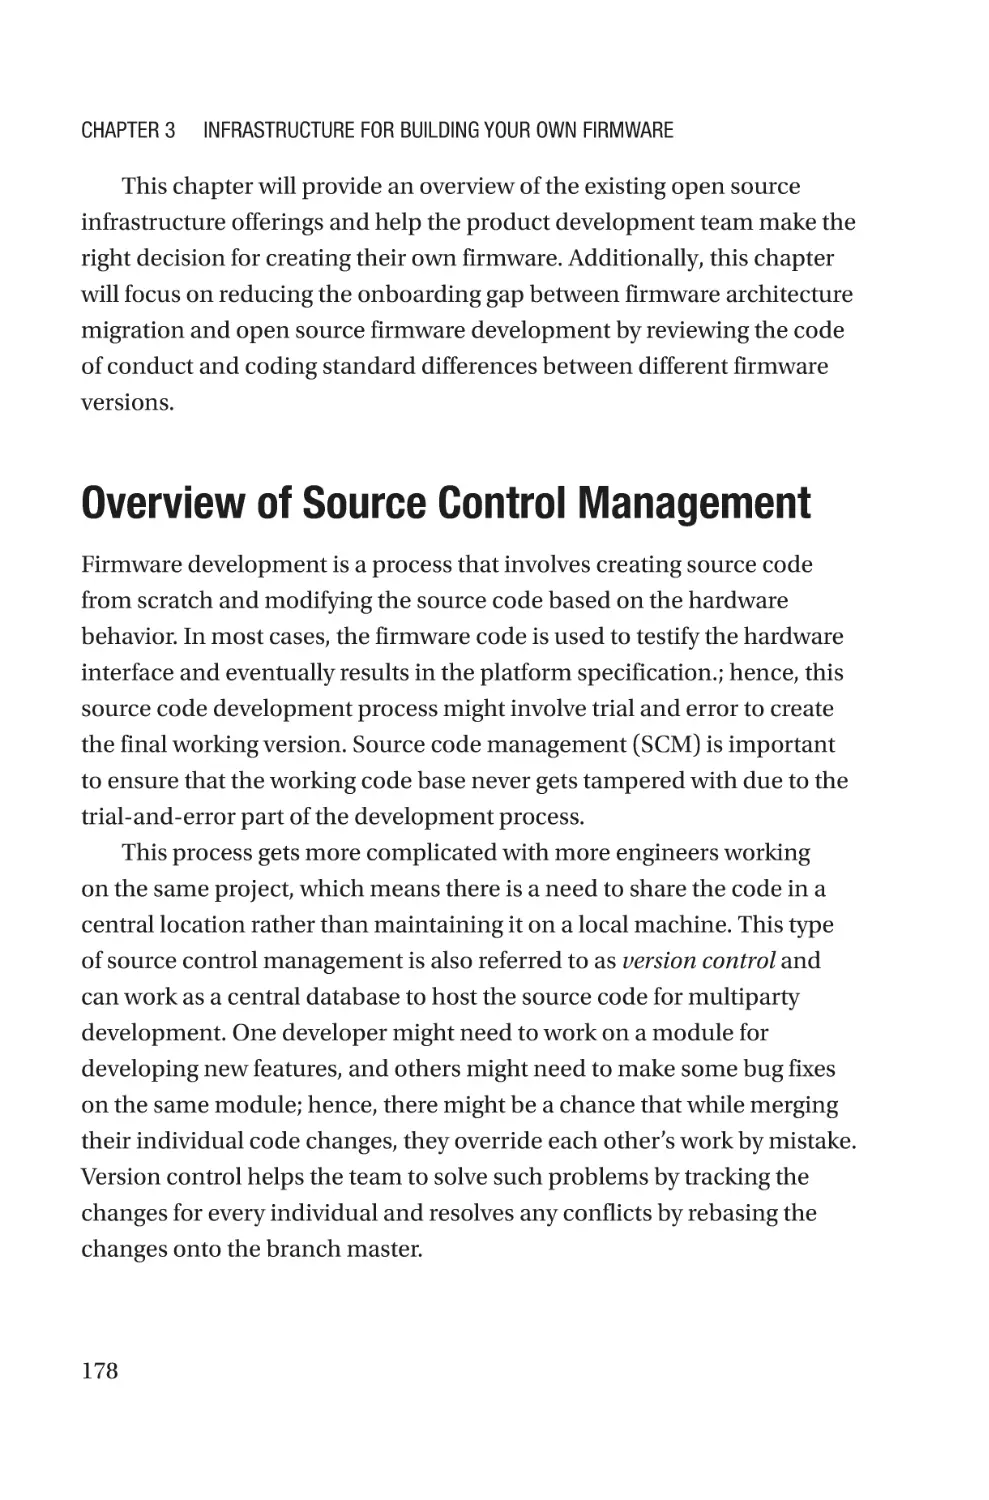 Overview of Source Control Management